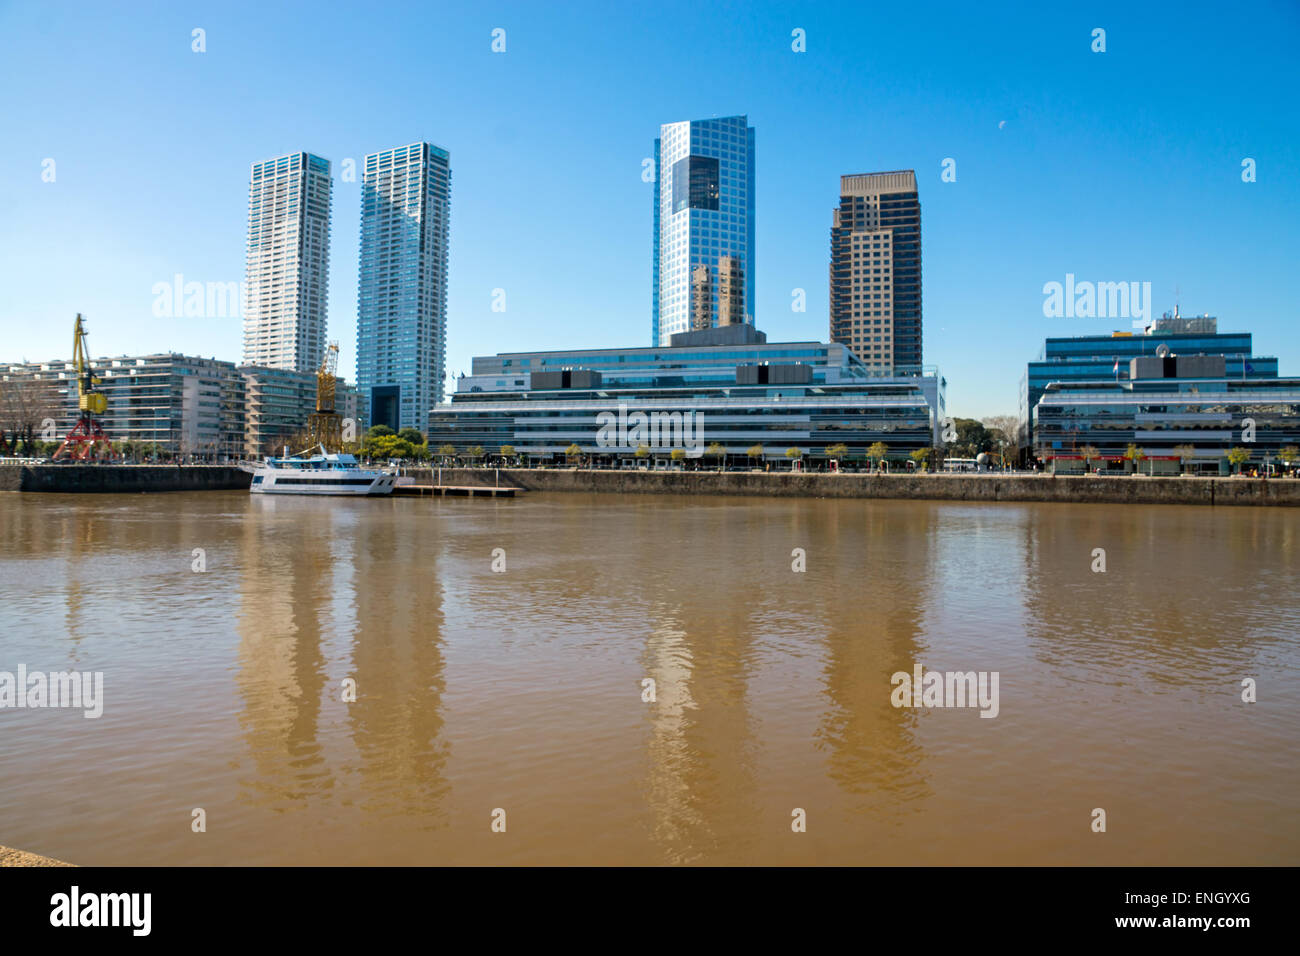 A part of Puerto Madero in Buenos Aires, Argentina Stock Photo